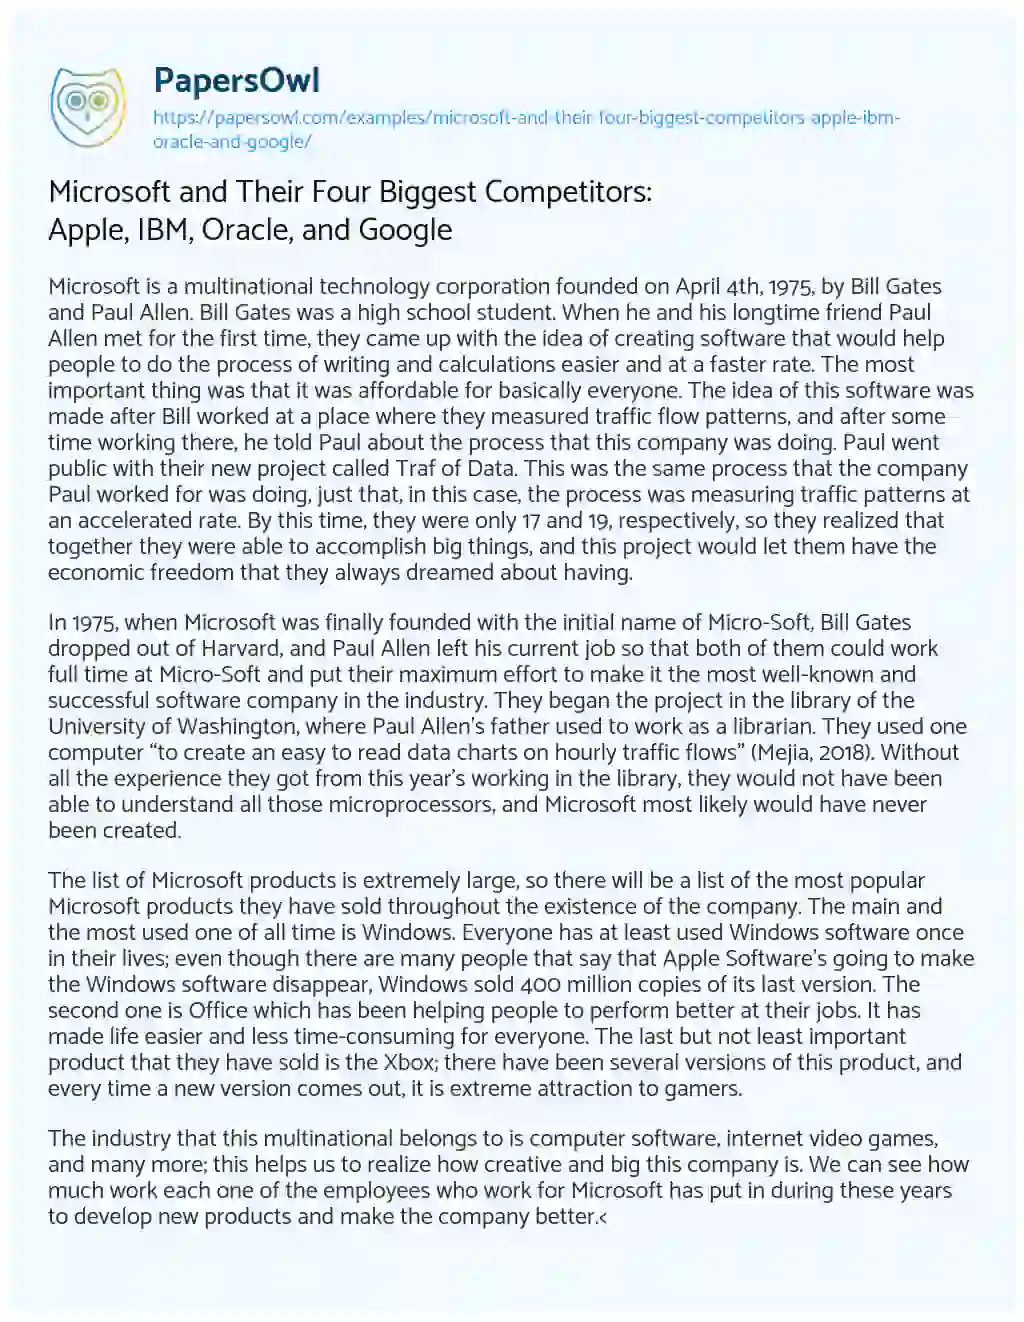 Essay on Microsoft and their Four Biggest Competitors: Apple, IBM, Oracle, and Google